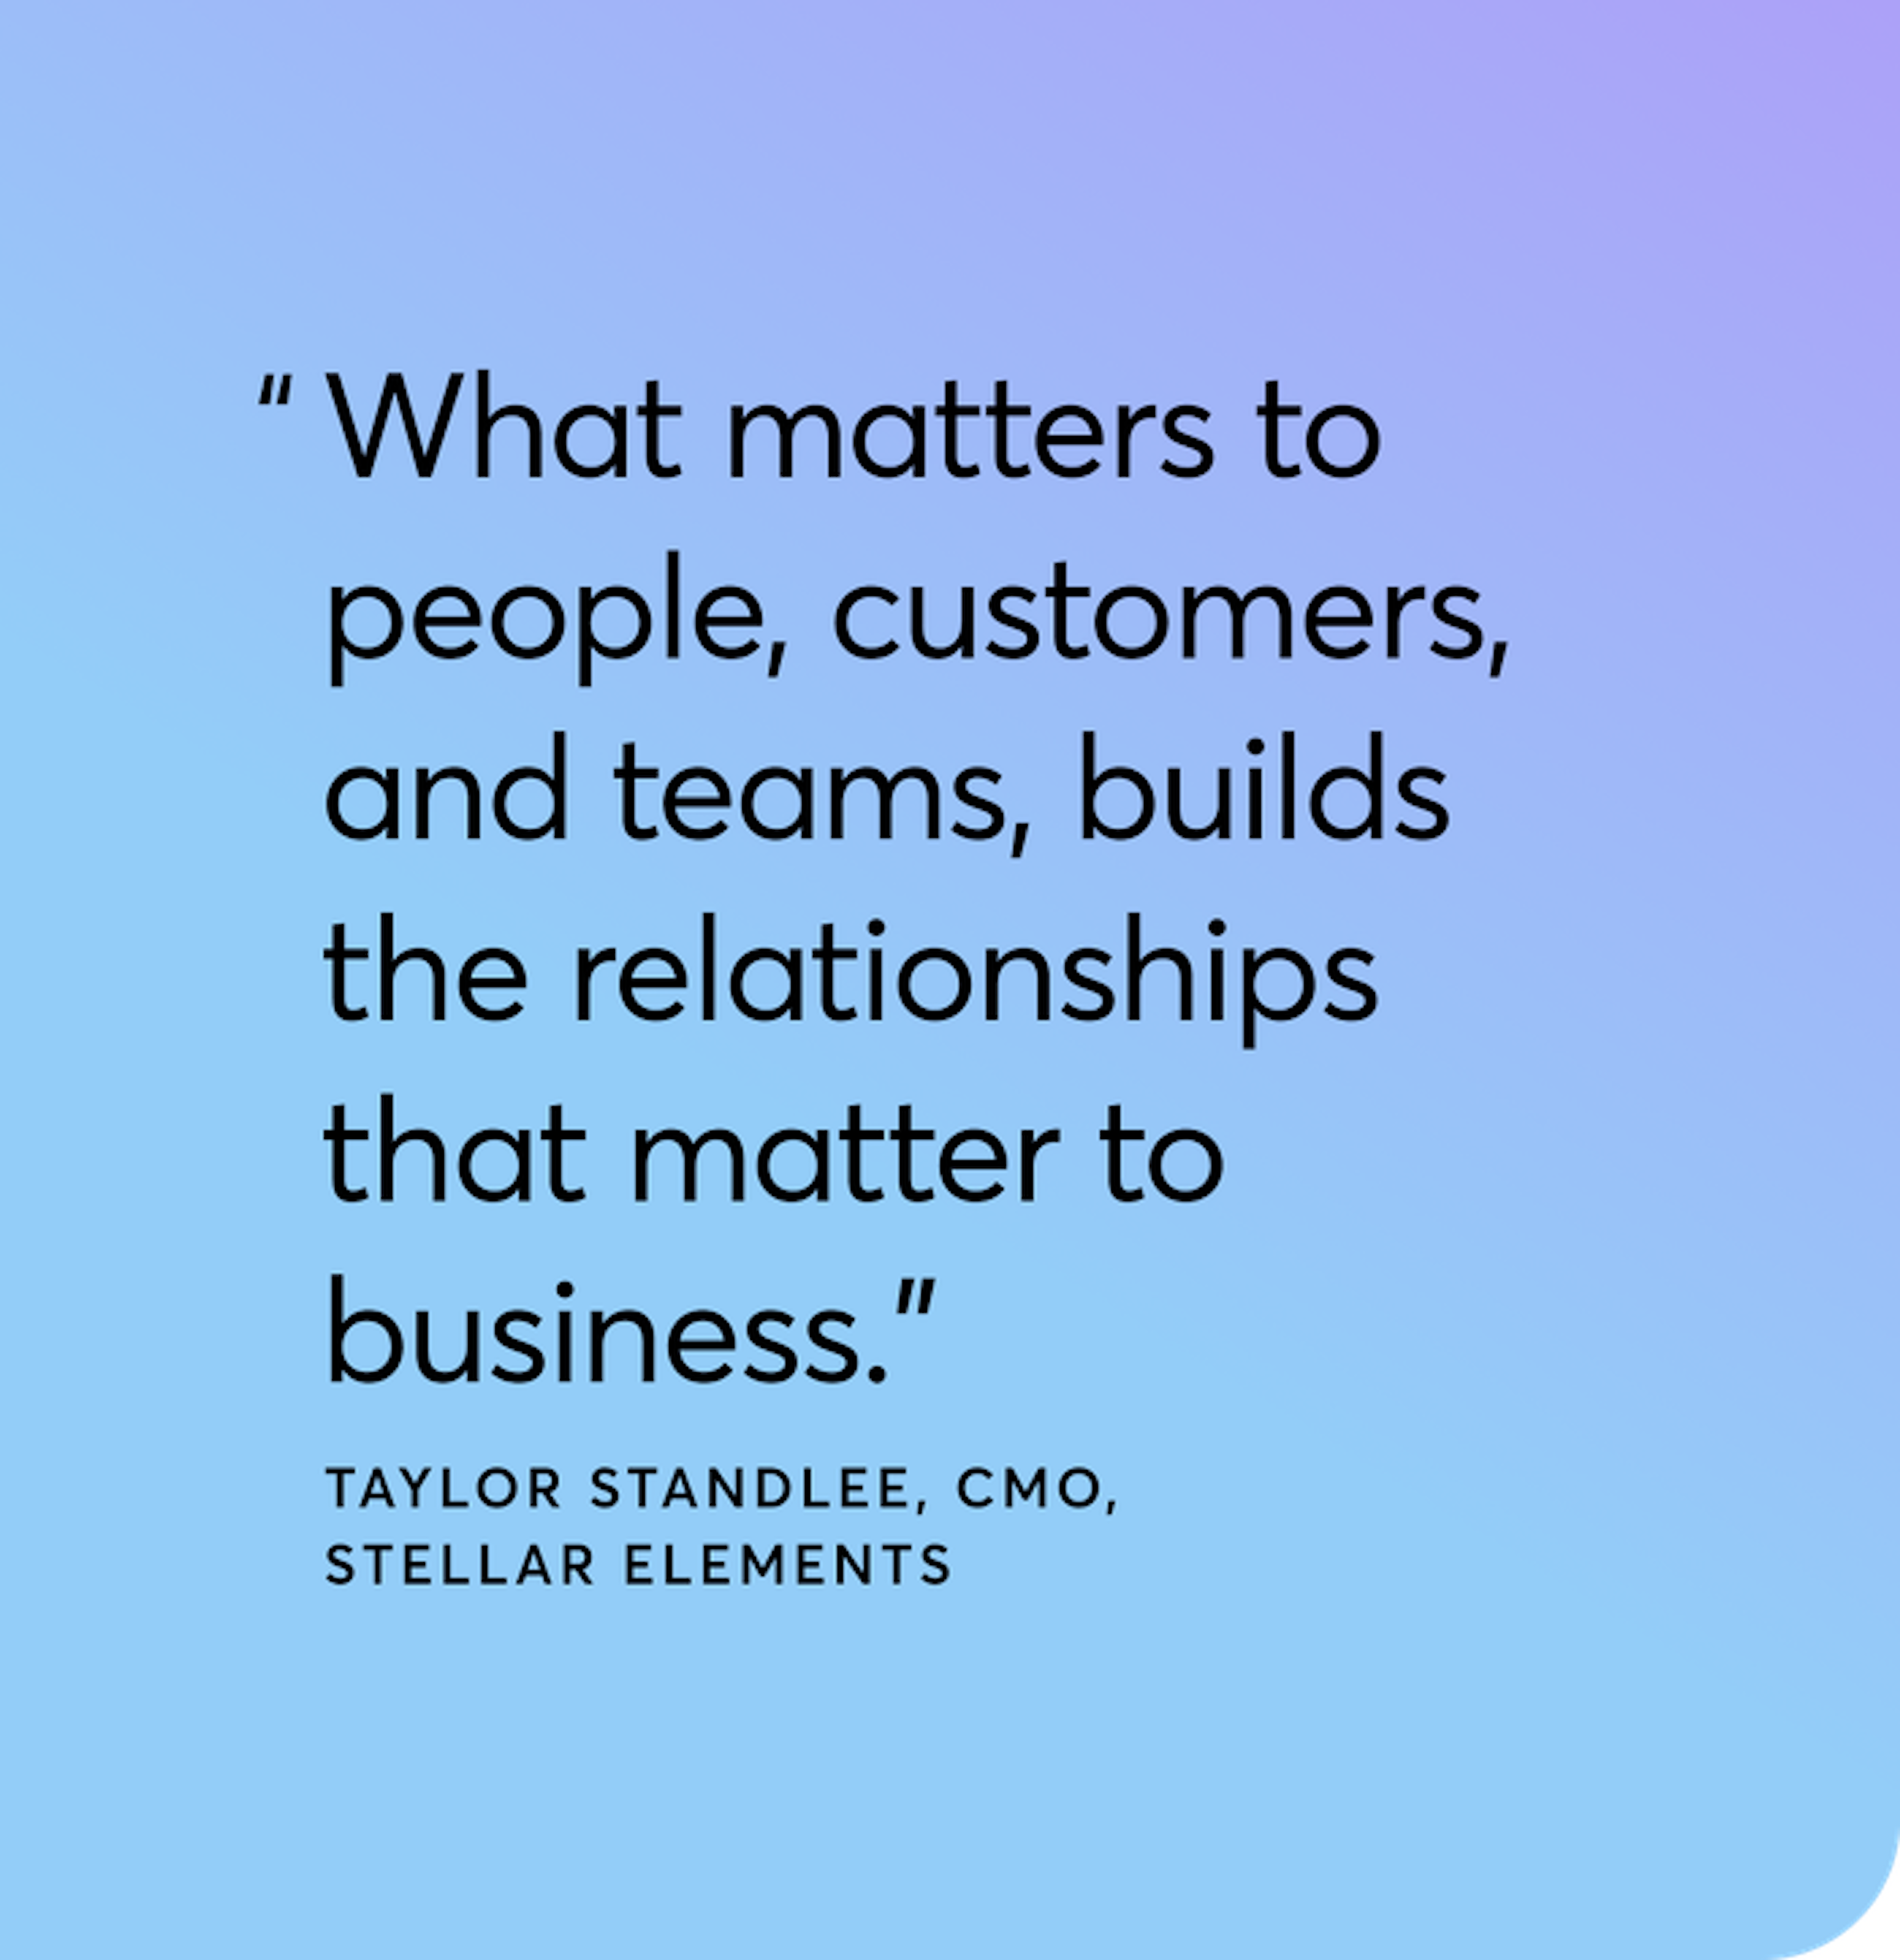 "What matters to people, customers, and teams, builds the relationships that matter to business."